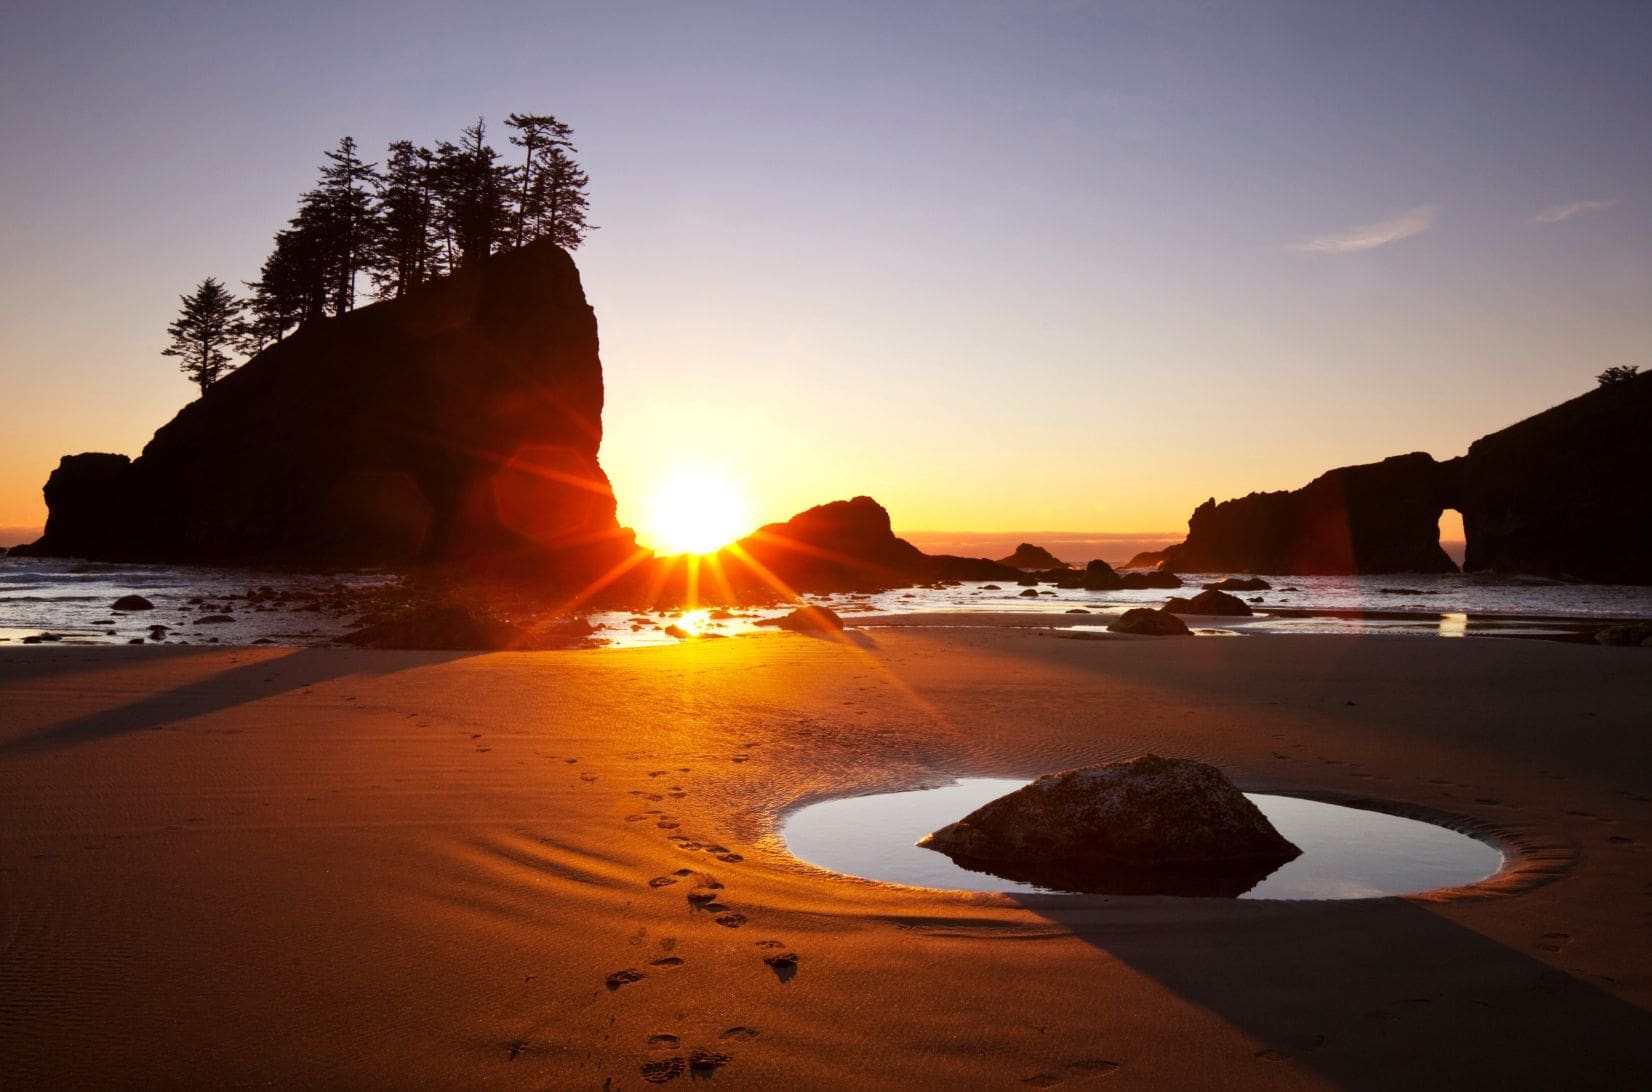 What’s Special About Olympic National Park?